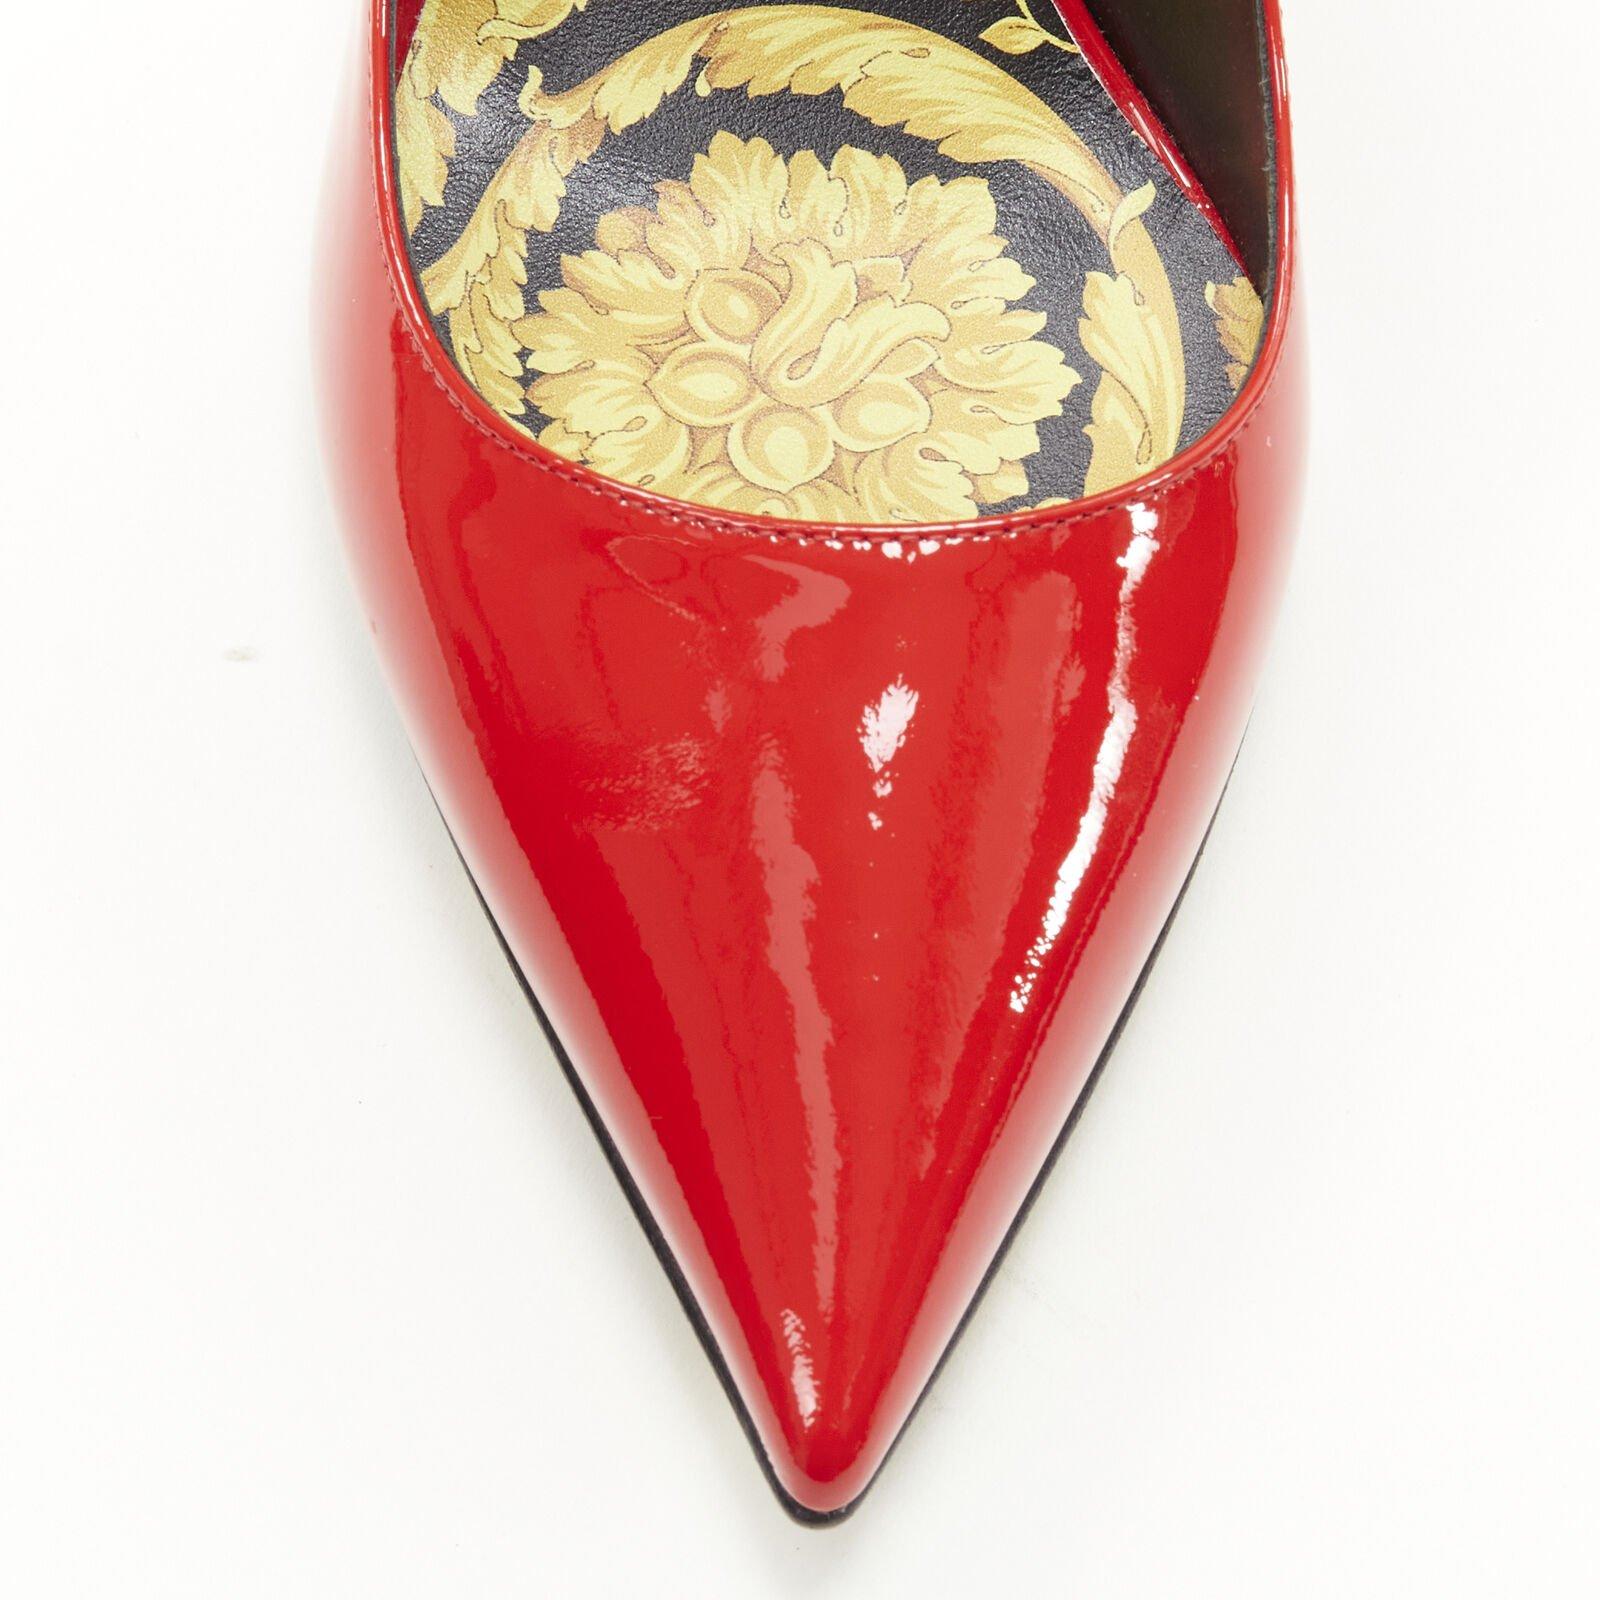 VERSACE Hibiscus Barocco gold sole red patent Medusa stud pump EU37.5 US7.5 For Sale 3